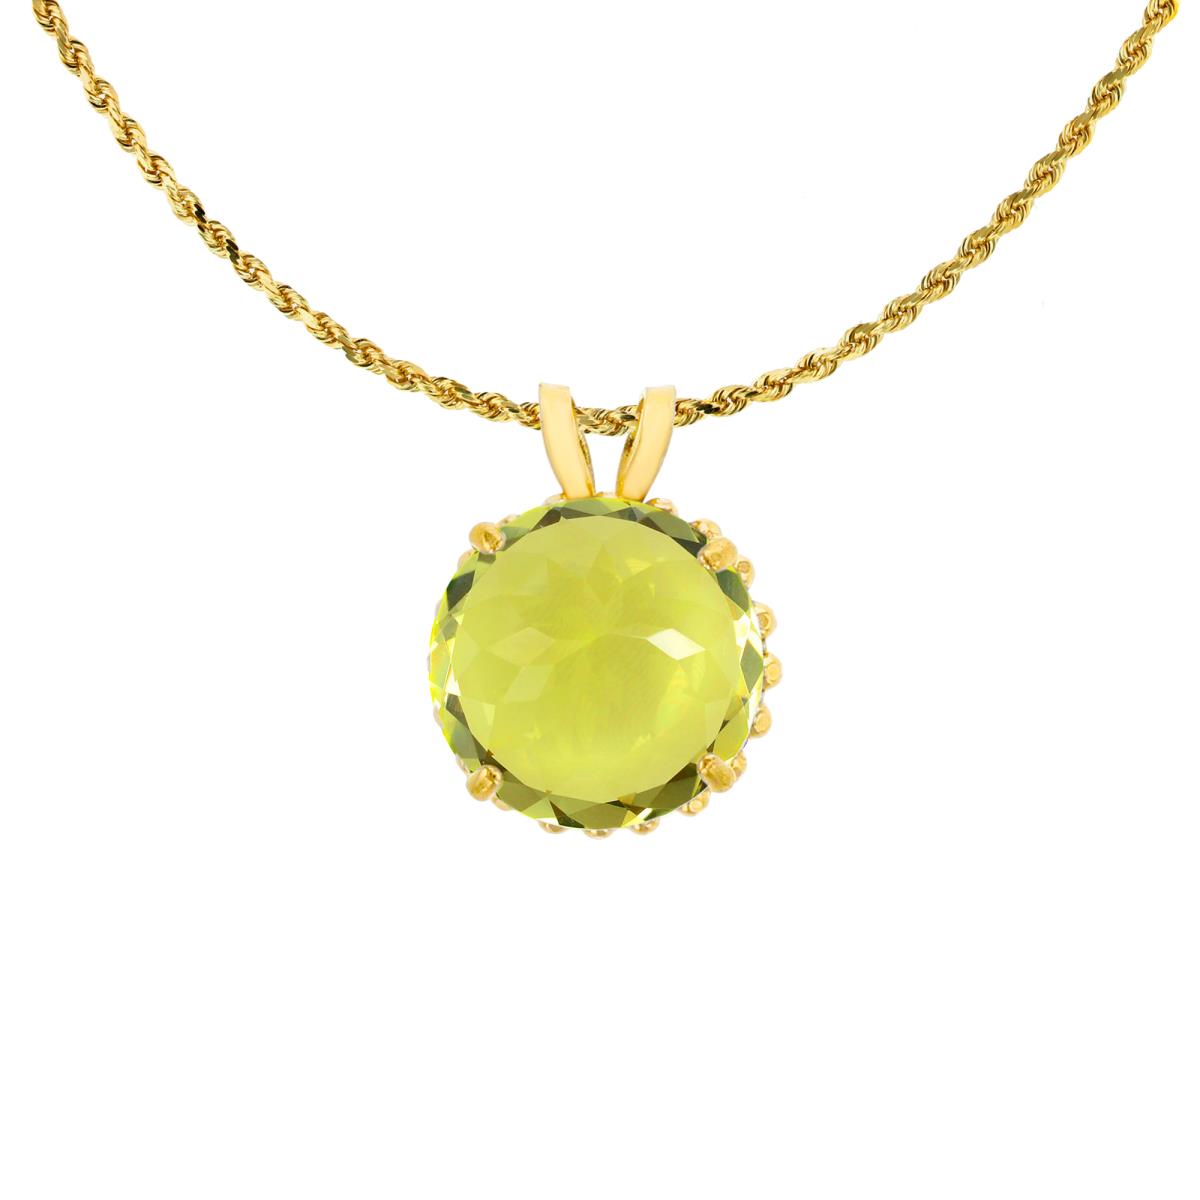 10K Yellow Gold 7mm Rd Cut Lemon Quartz with Bead Frame Rabbit Ear 18" Rope Chain Necklace